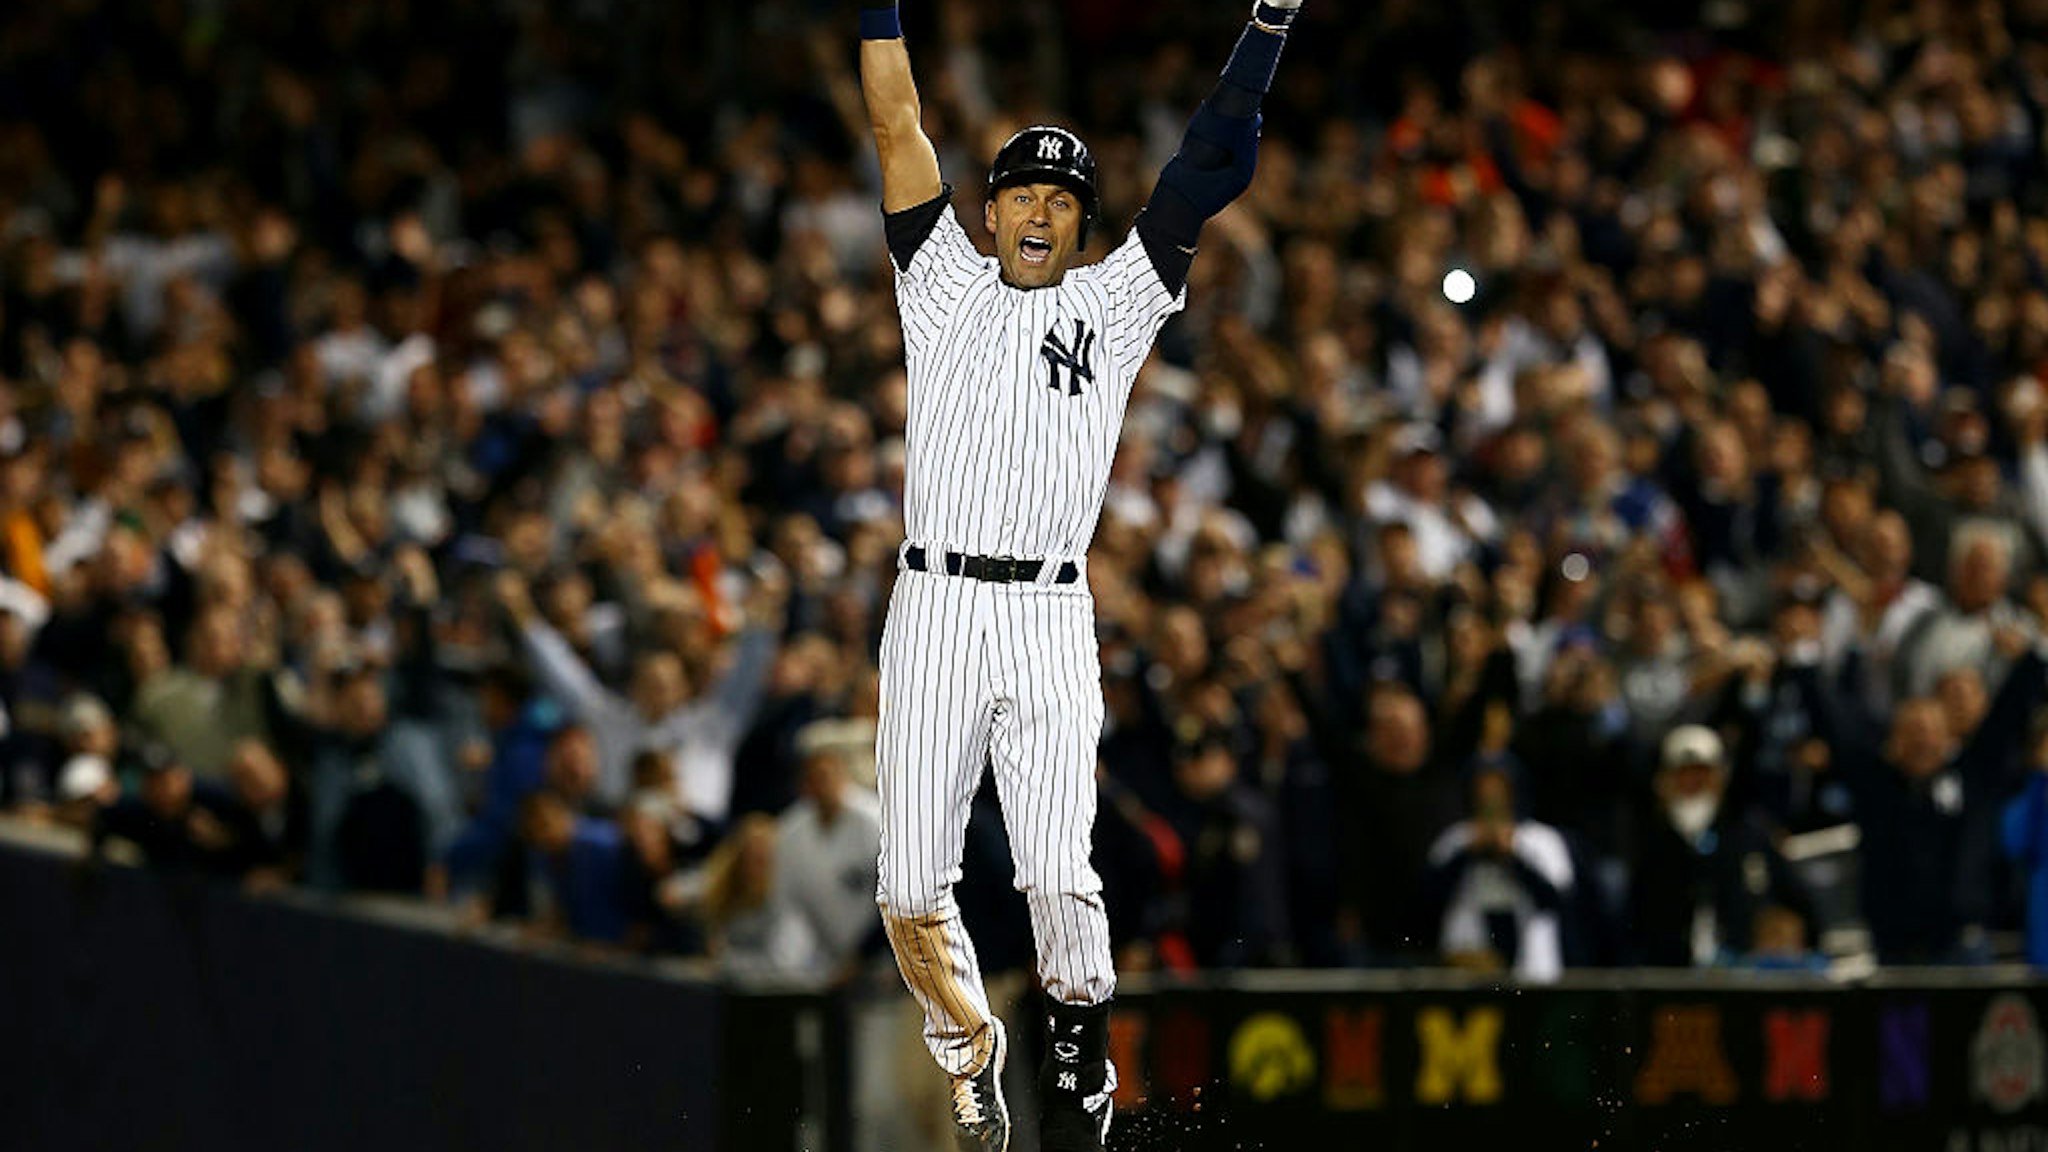 NEW YORK, NY - SEPTEMBER 25: Derek Jeter #2 of the New York Yankees celebrates after a game winning RBI hit in the ninth inning against the Baltimore Orioles in his last game ever at Yankee Stadium on September 25, 2014 in the Bronx borough of New York City. (Photo by Elsa/Getty Images)